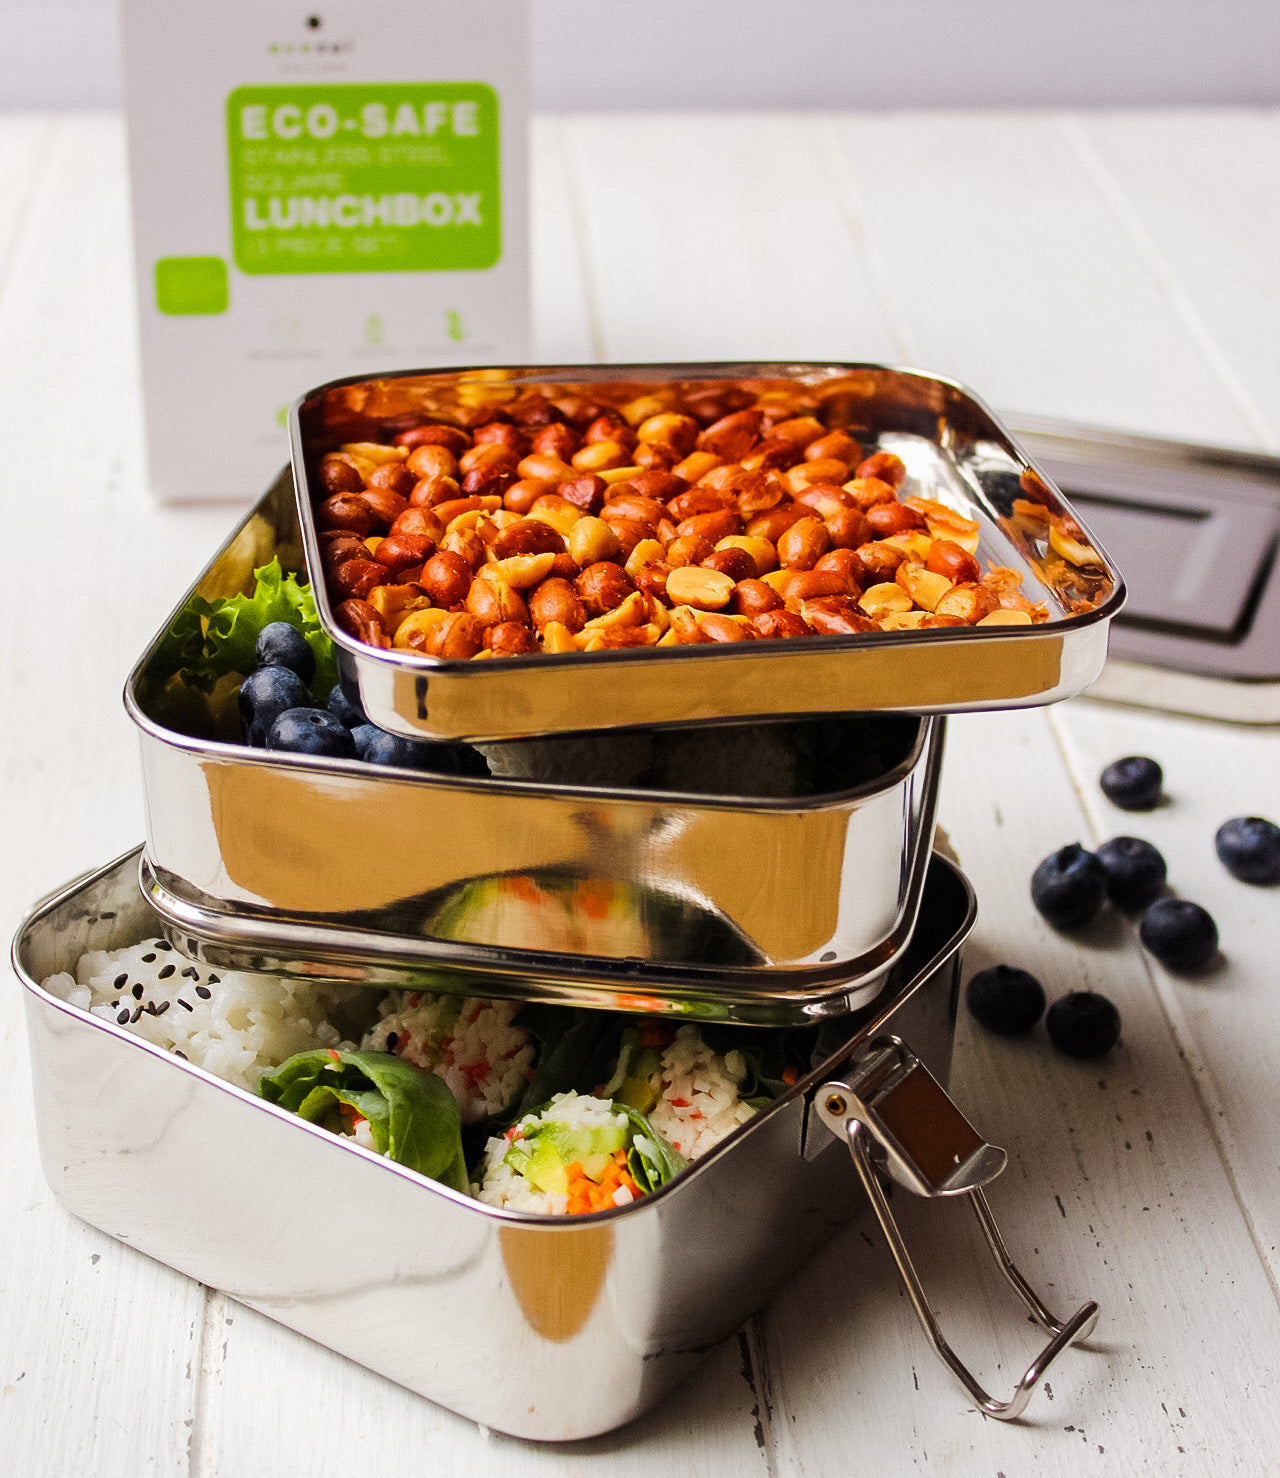 ecozoi Extra Large Leak Proof Stainless Steel Bento Lunch Box with Mini Container and Removable Divider